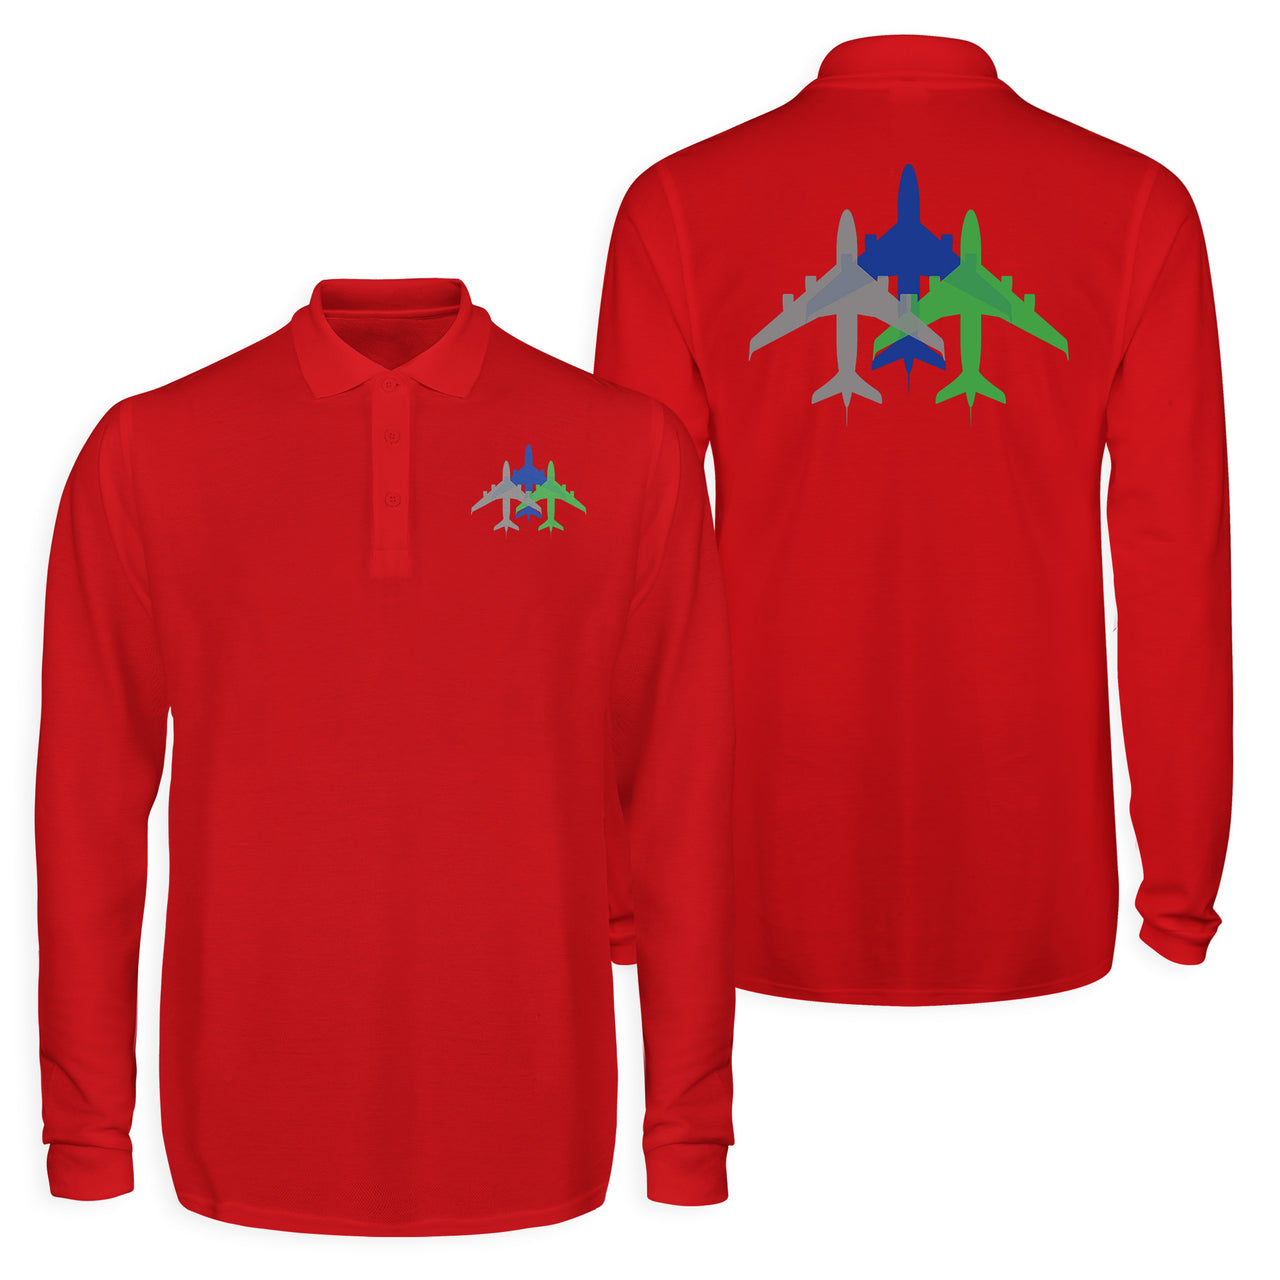 Colourful 3 Airplanes Designed Long Sleeve Polo T-Shirts (Double-Side)